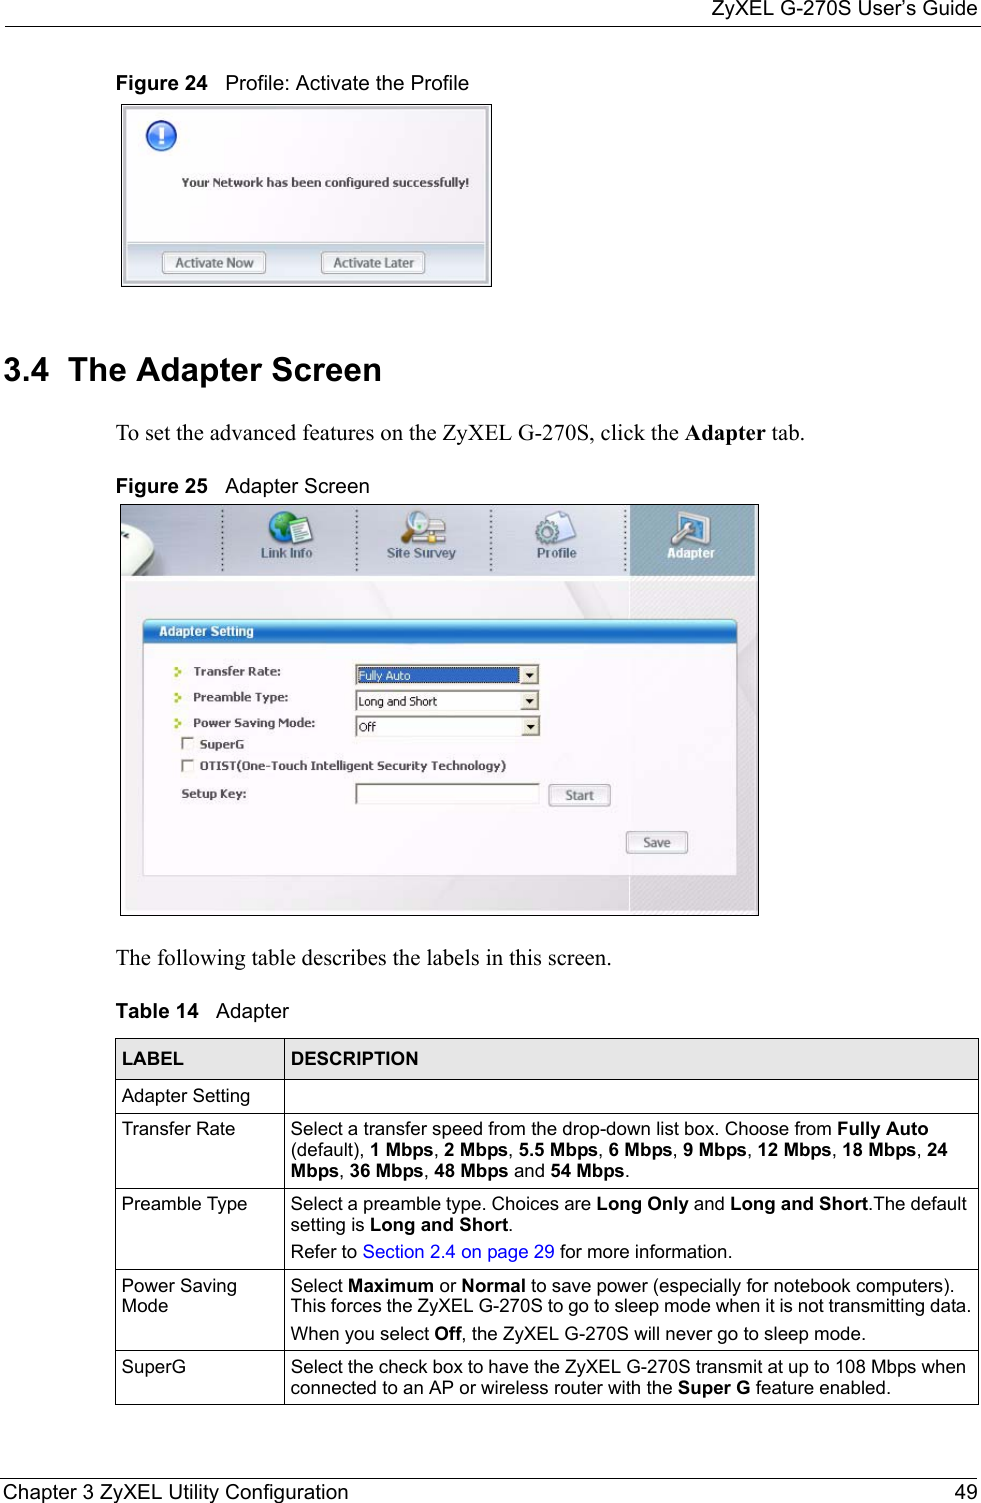 ZyXEL G-270S User’s GuideChapter 3 ZyXEL Utility Configuration 49Figure 24   Profile: Activate the Profile 3.4  The Adapter Screen To set the advanced features on the ZyXEL G-270S, click the Adapter tab.Figure 25   Adapter Screen The following table describes the labels in this screen. Table 14   AdapterLABEL DESCRIPTIONAdapter SettingTransfer Rate Select a transfer speed from the drop-down list box. Choose from Fully Auto (default), 1 Mbps, 2 Mbps, 5.5 Mbps, 6 Mbps, 9 Mbps, 12 Mbps, 18 Mbps, 24 Mbps, 36 Mbps, 48 Mbps and 54 Mbps.Preamble Type Select a preamble type. Choices are Long Only and Long and Short.The default setting is Long and Short. Refer to Section 2.4 on page 29 for more information.Power Saving ModeSelect Maximum or Normal to save power (especially for notebook computers). This forces the ZyXEL G-270S to go to sleep mode when it is not transmitting data.When you select Off, the ZyXEL G-270S will never go to sleep mode.SuperG Select the check box to have the ZyXEL G-270S transmit at up to 108 Mbps when connected to an AP or wireless router with the Super G feature enabled.